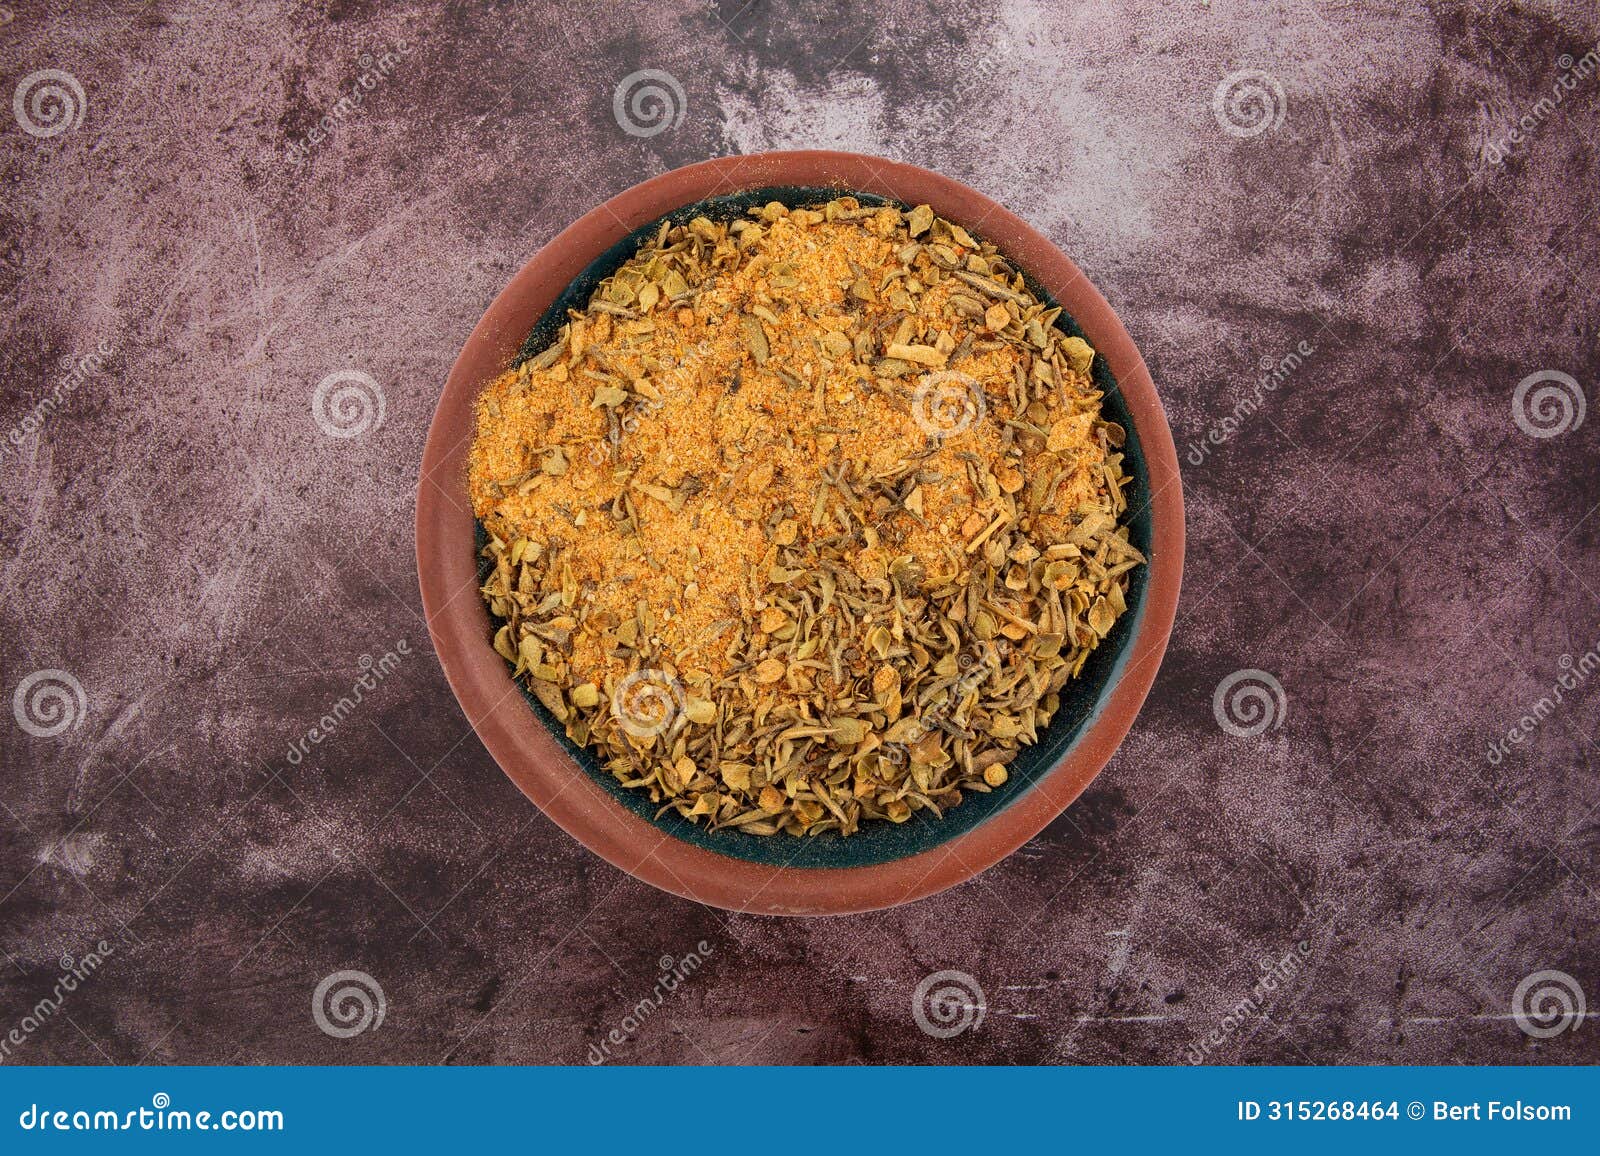 top view of a small bowl filled with cajun blackened seasoning on a red mottled tabletop